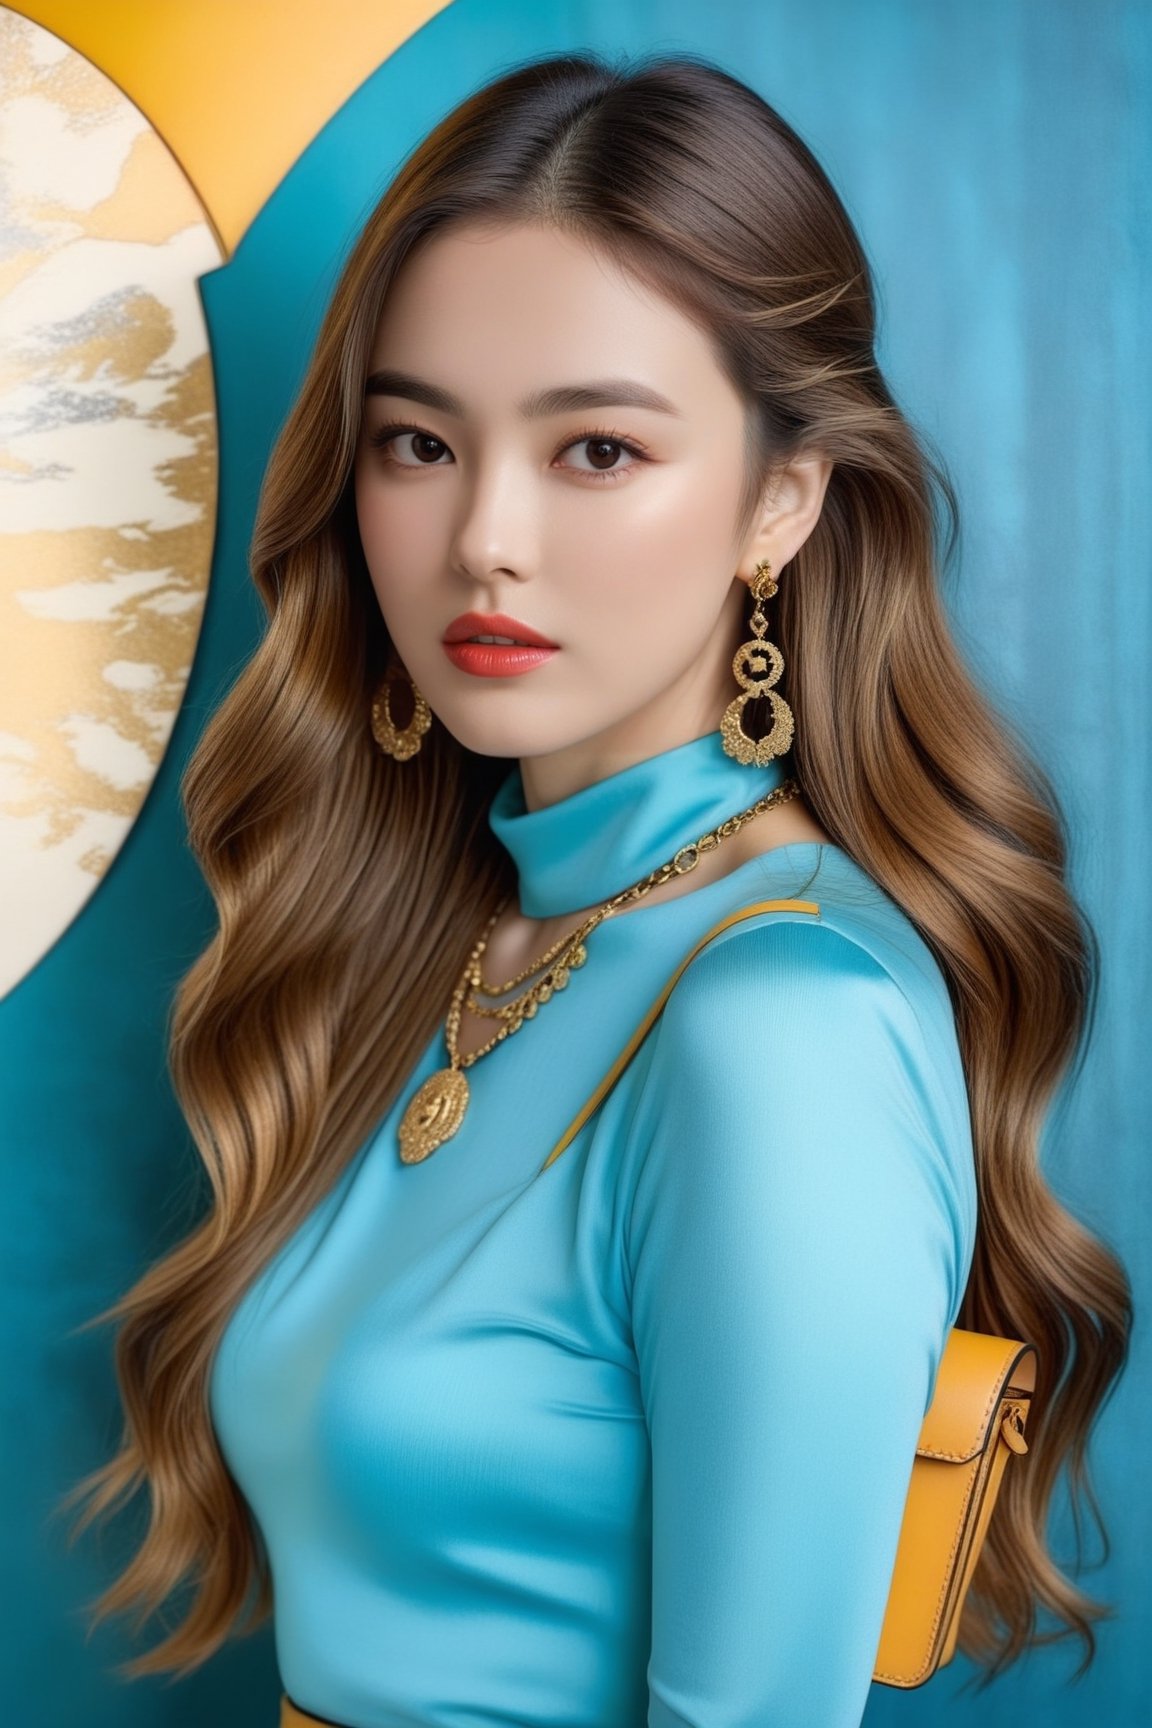 Hyper-Realistic photo of a girl,20yo,1girl,perfect female form,perfect body proportion,perfect anatomy,[Turquoise,Baby Blue,Mustard Yellow,Gray color],elegant dress,detailed exquisite face,soft shiny skin,mesmerizing,detailed shiny long hair,small earrings,necklaces,Louis Vuitton bag,cluttered maximalism,simple backdrop with gradation
BREAK
(rule of thirds:1.3),perfect composition,studio photo,trending on artstation,(Masterpiece,Best quality,32k,UHD:1.4),(sharp focus,high contrast,HDR,hyper-detailed,intricate details,ultra-realistic,award-winning photo,ultra-clear,kodachrome 800:1.25),(chiaroscuro lighting,soft rim lighting:1.15),by Karol Bak,Antonio Lopez,Gustav Klimt and Hayao Miyazaki,photo_b00ster,real_booster,art_booster,song-hyegyo-xl